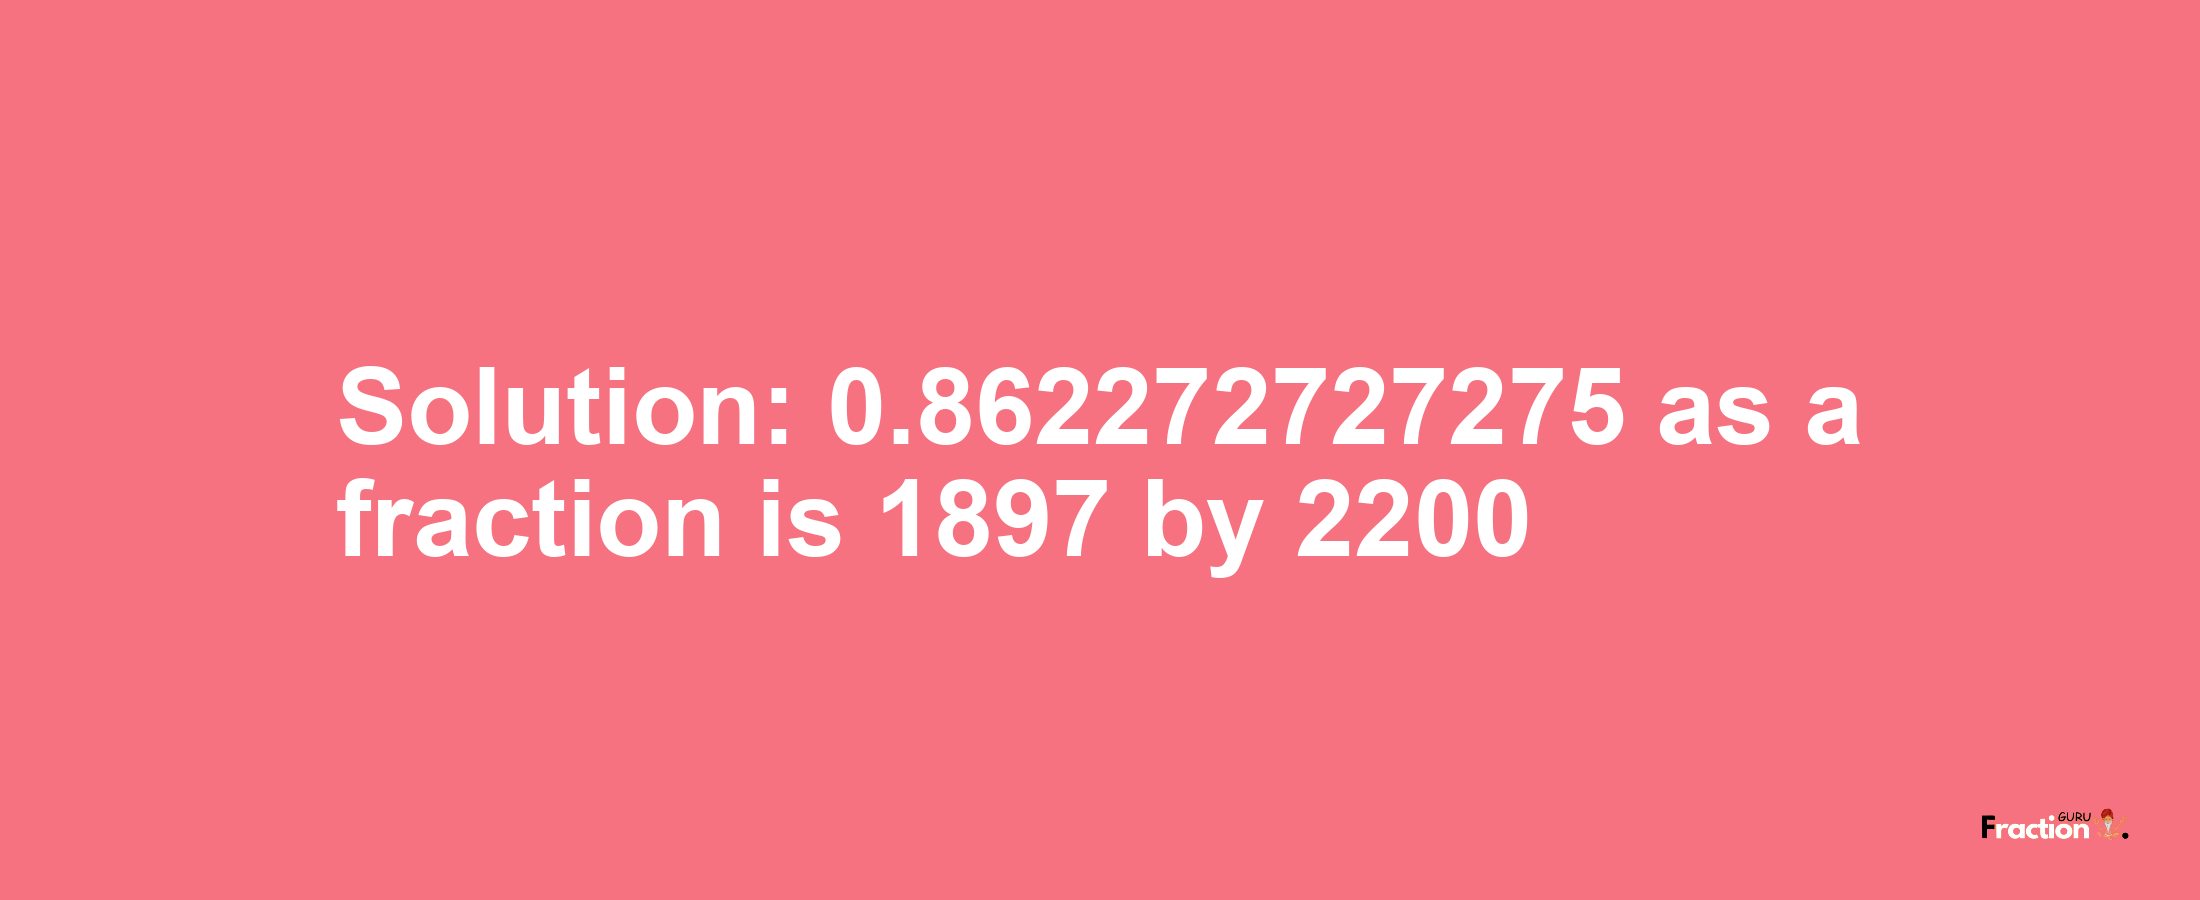 Solution:0.862272727275 as a fraction is 1897/2200